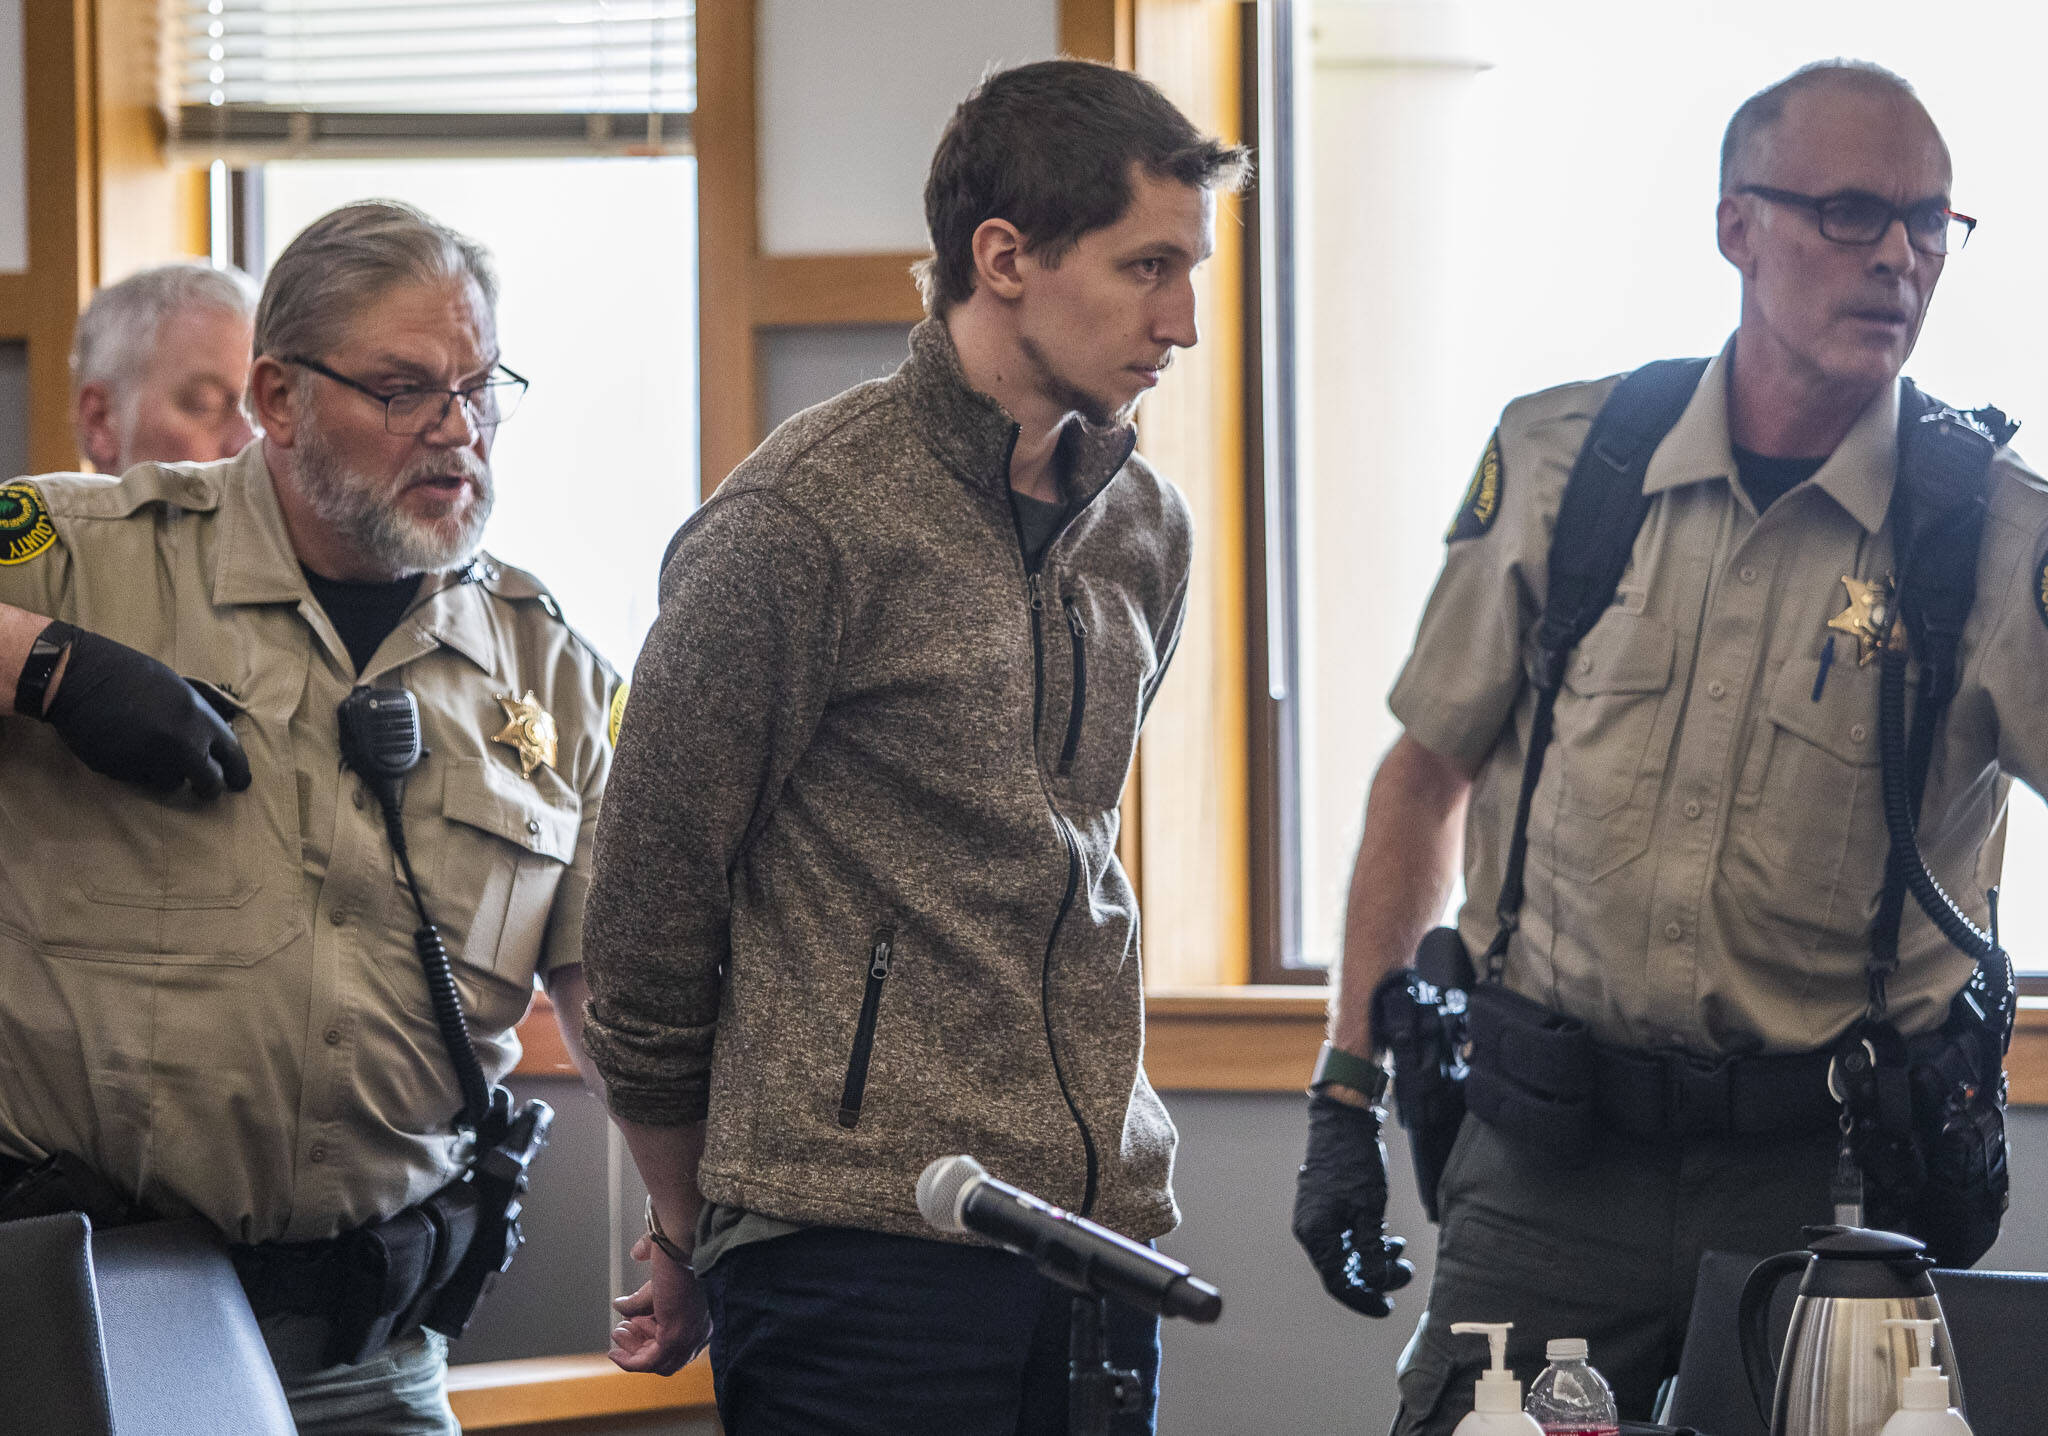 Cole Krause is handcuffed after being sentenced to 17 1/2 years in prison for four counts of felony sexual assault on Wednesday, in Everett. (Olivia Vanni / The Herald)